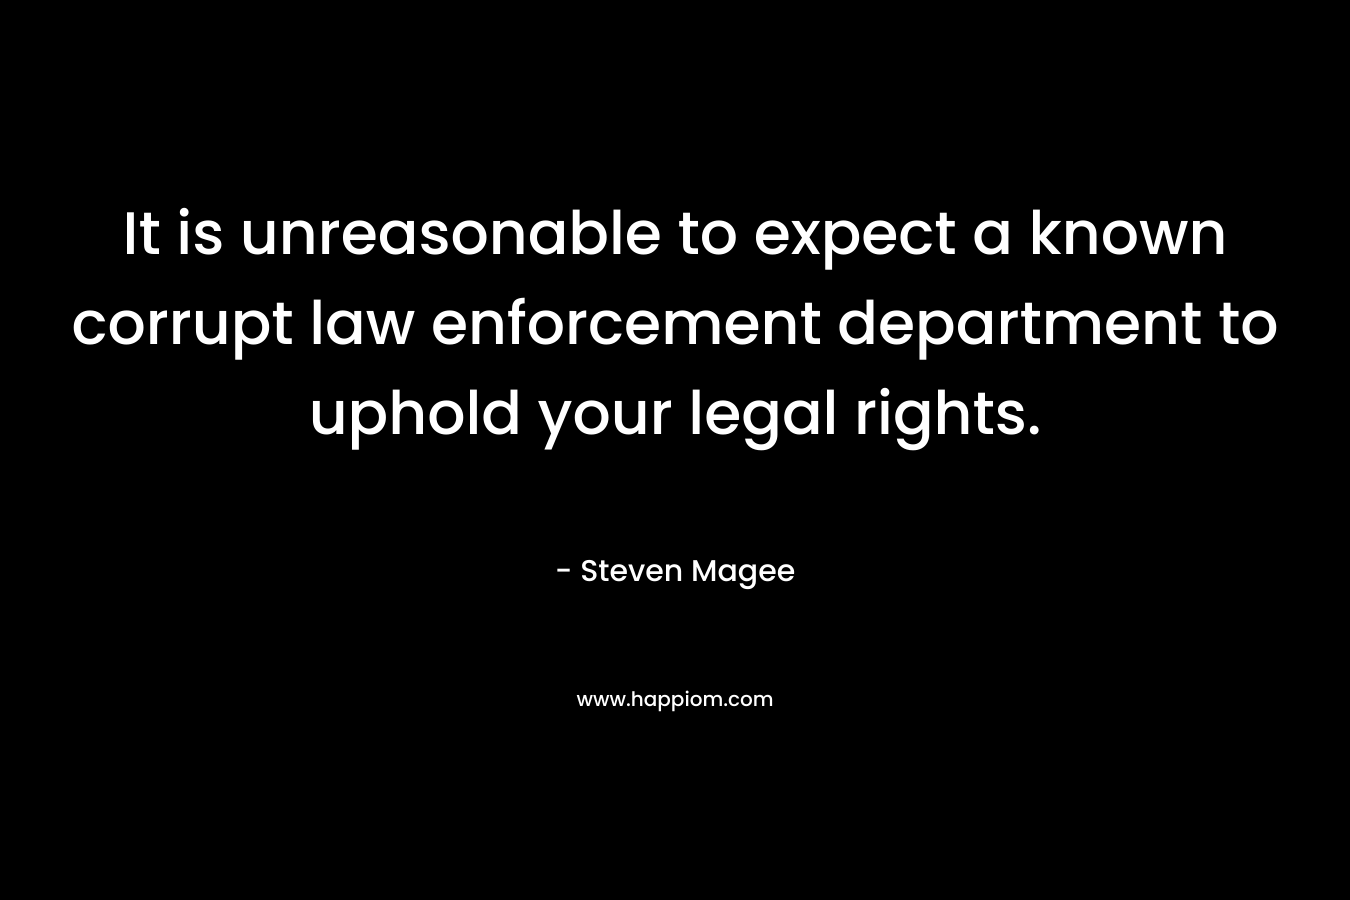 It is unreasonable to expect a known corrupt law enforcement department to uphold your legal rights. – Steven Magee